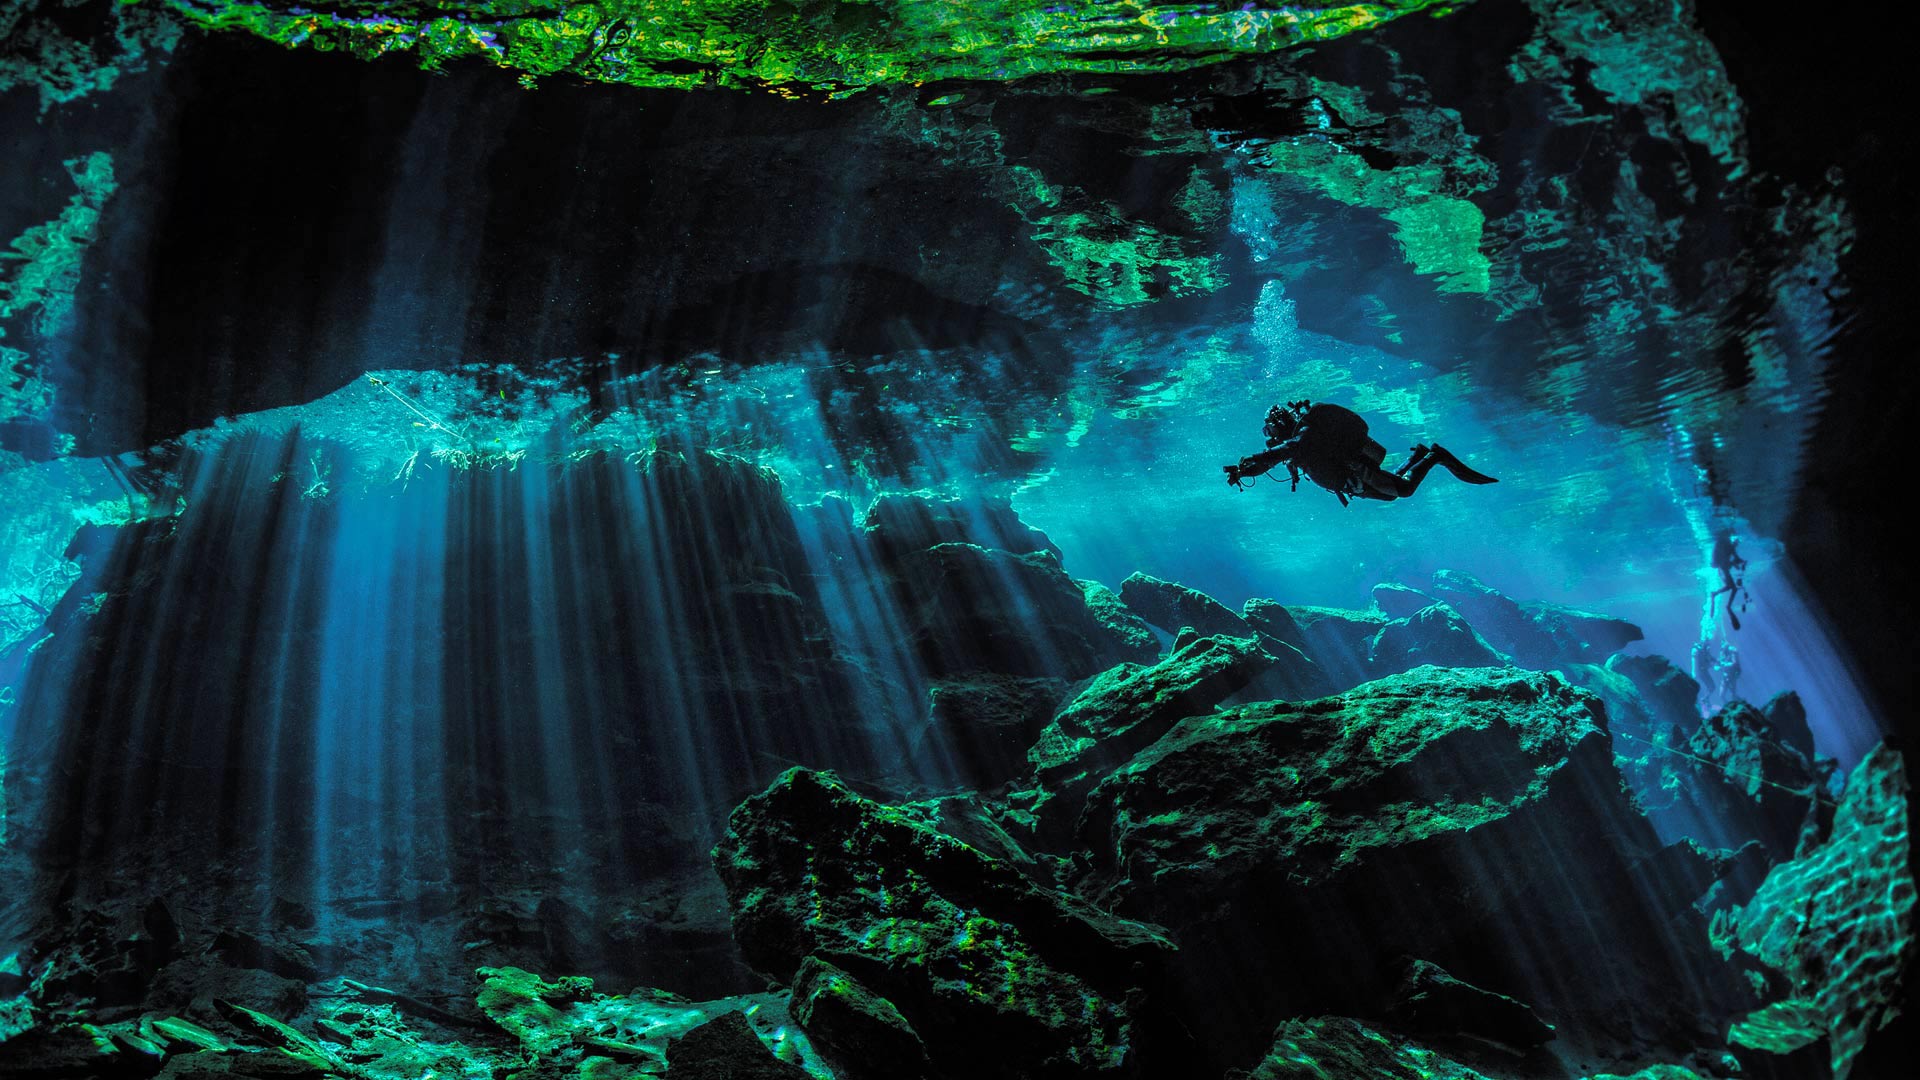 Scuba diver exploring the underwater cenotes near Puerto Aventuras, Mexico - Extreme Photographer/Getty Images)